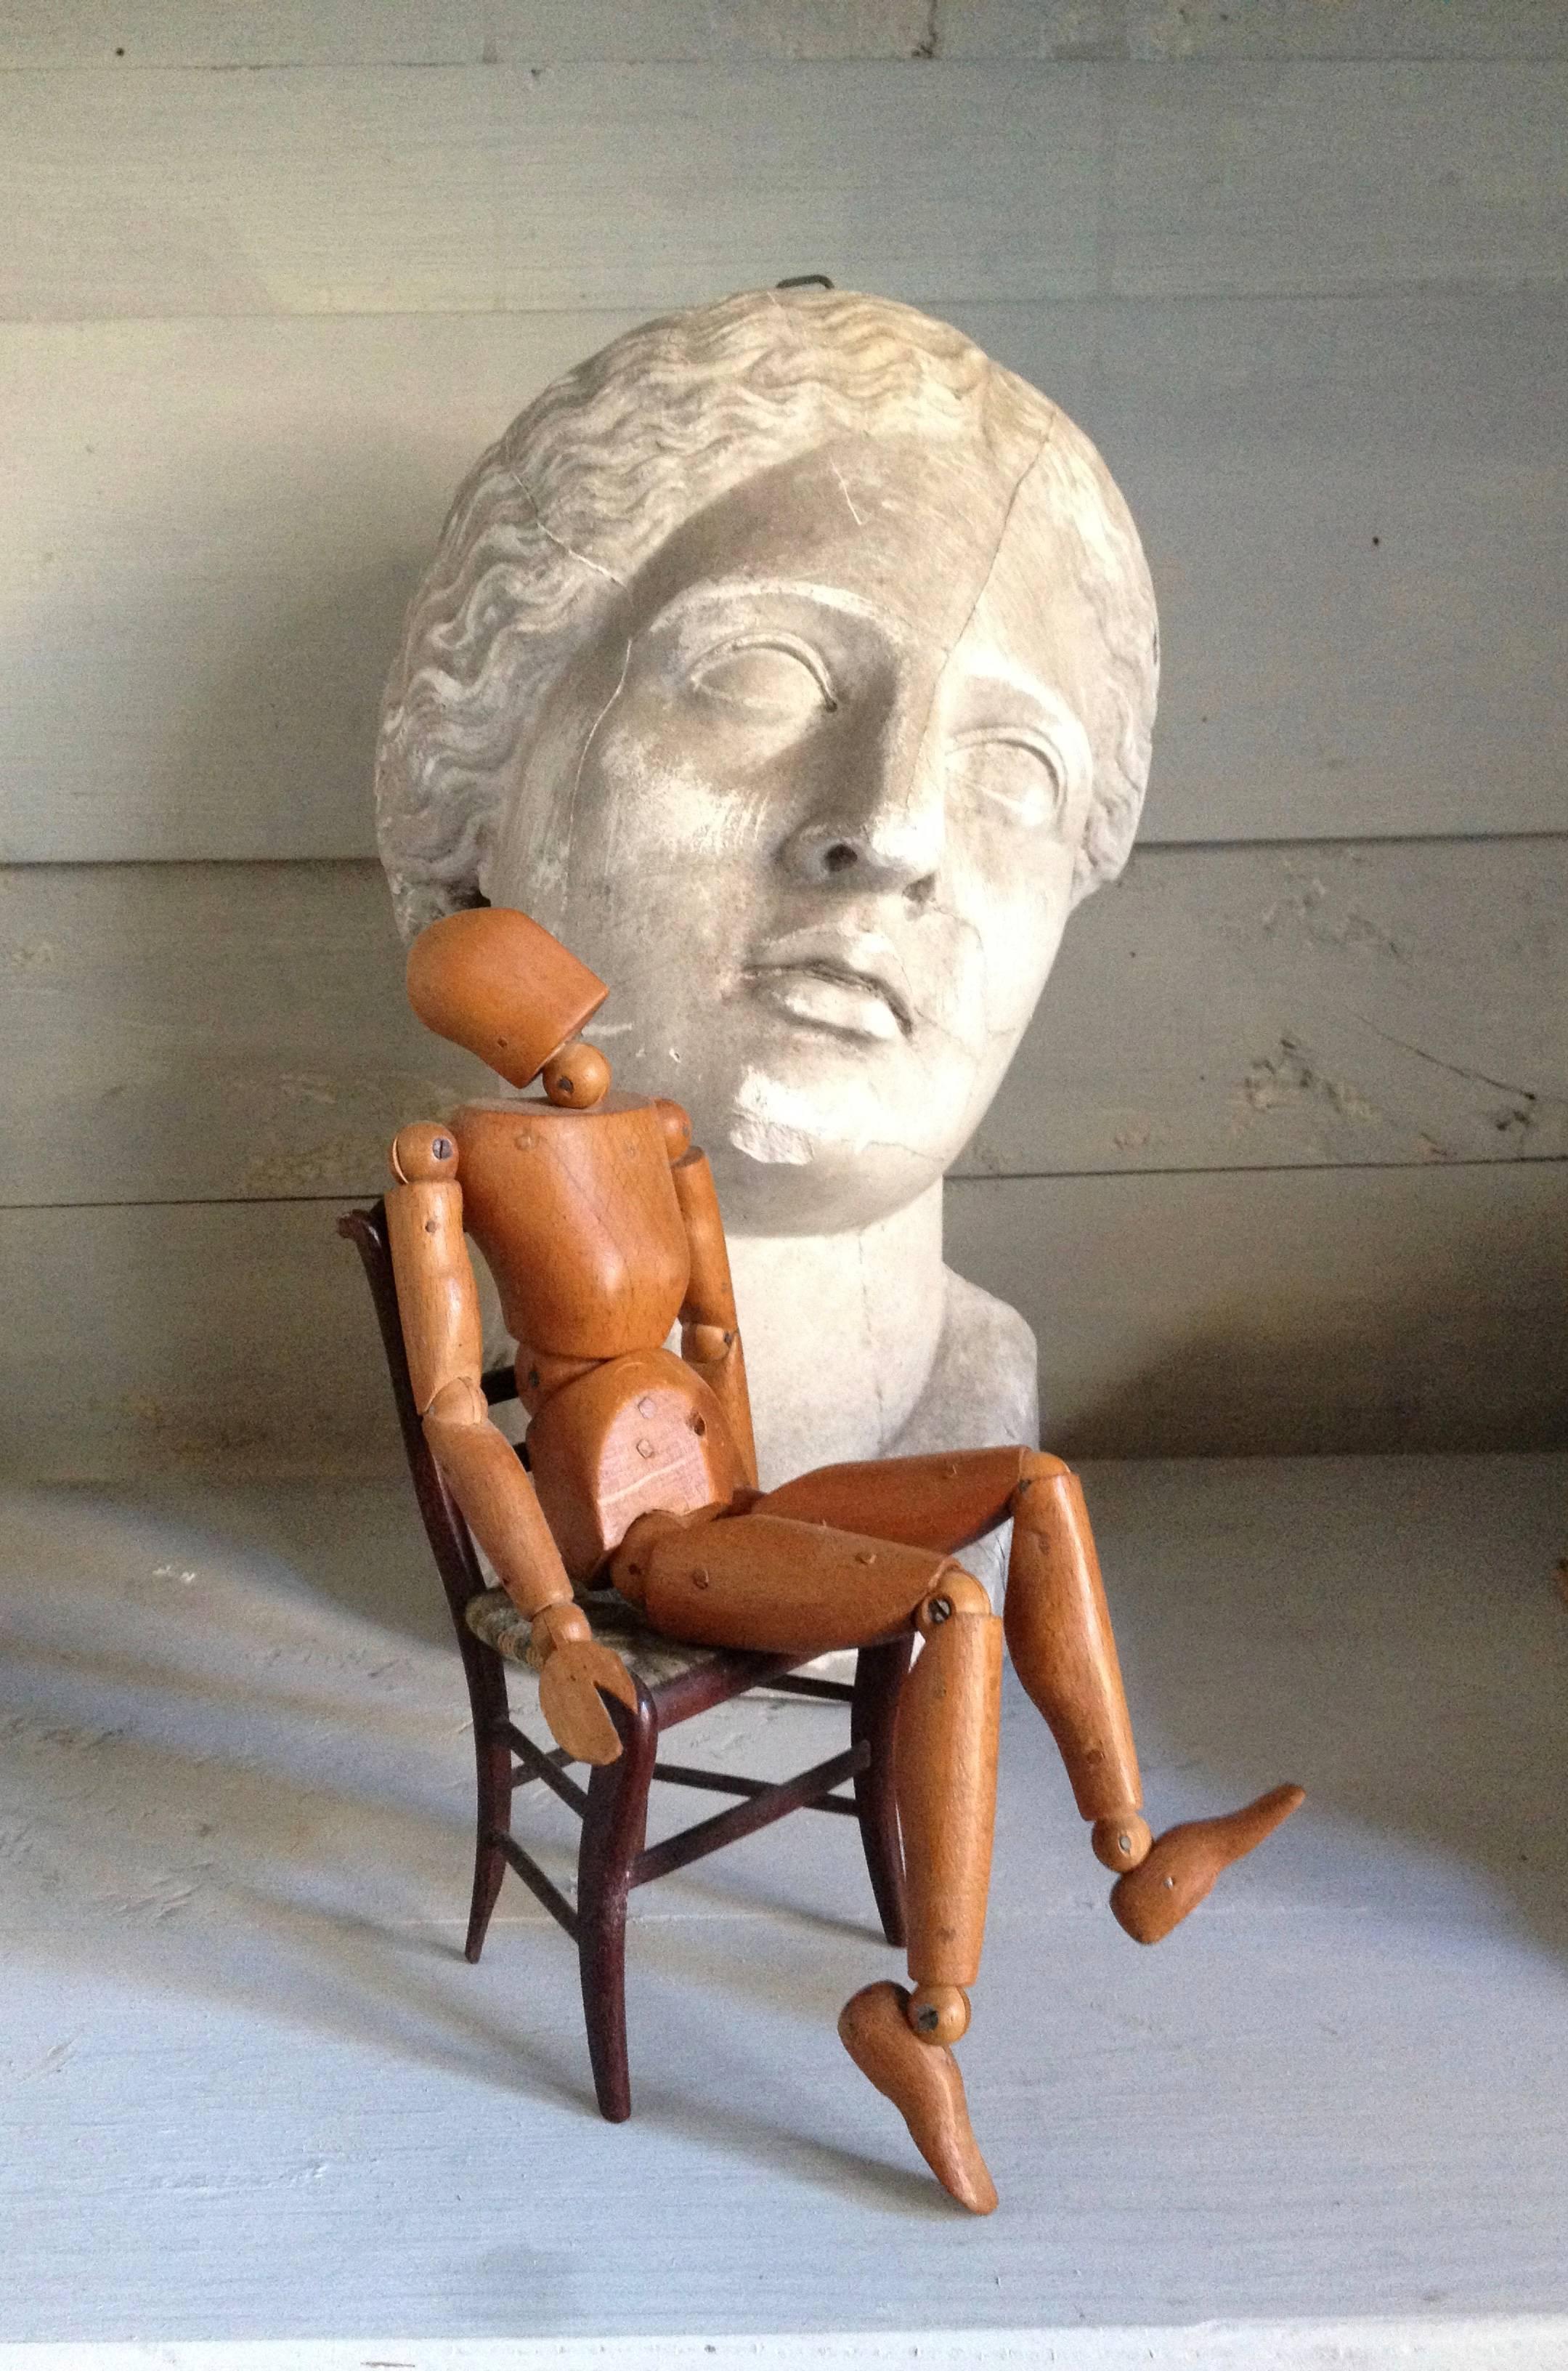 20th century French articulated painter or sculptor mannequin.